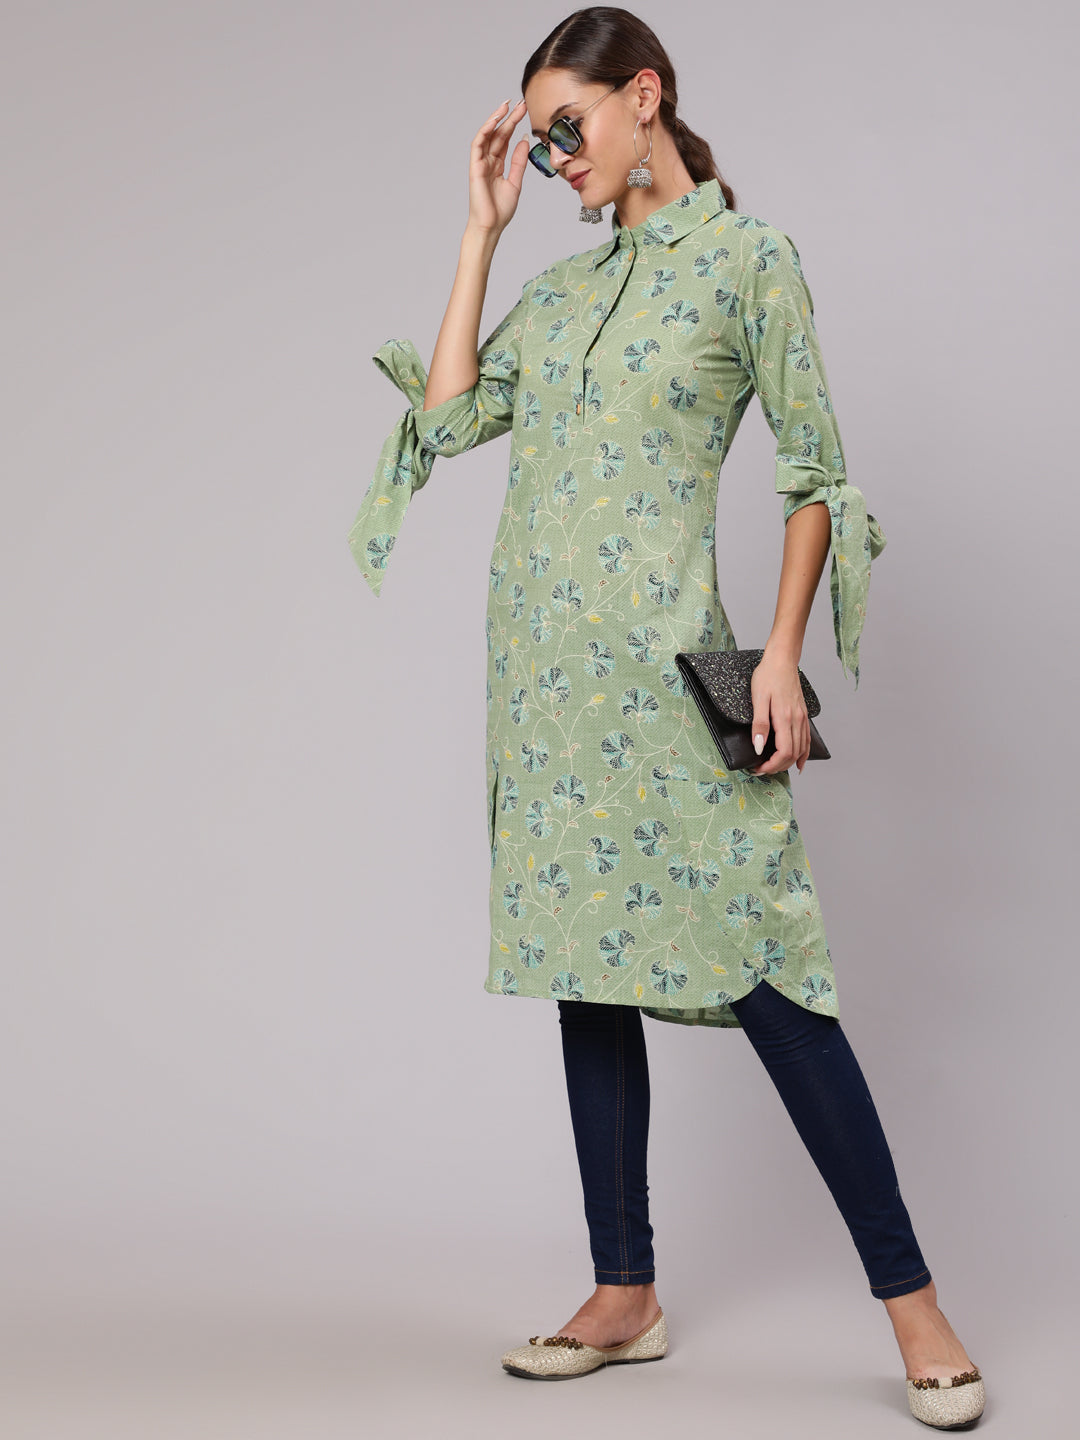 A Green Floral Cotton Printed Kurta With Tie-Up Sleeves And High-Low Hemline